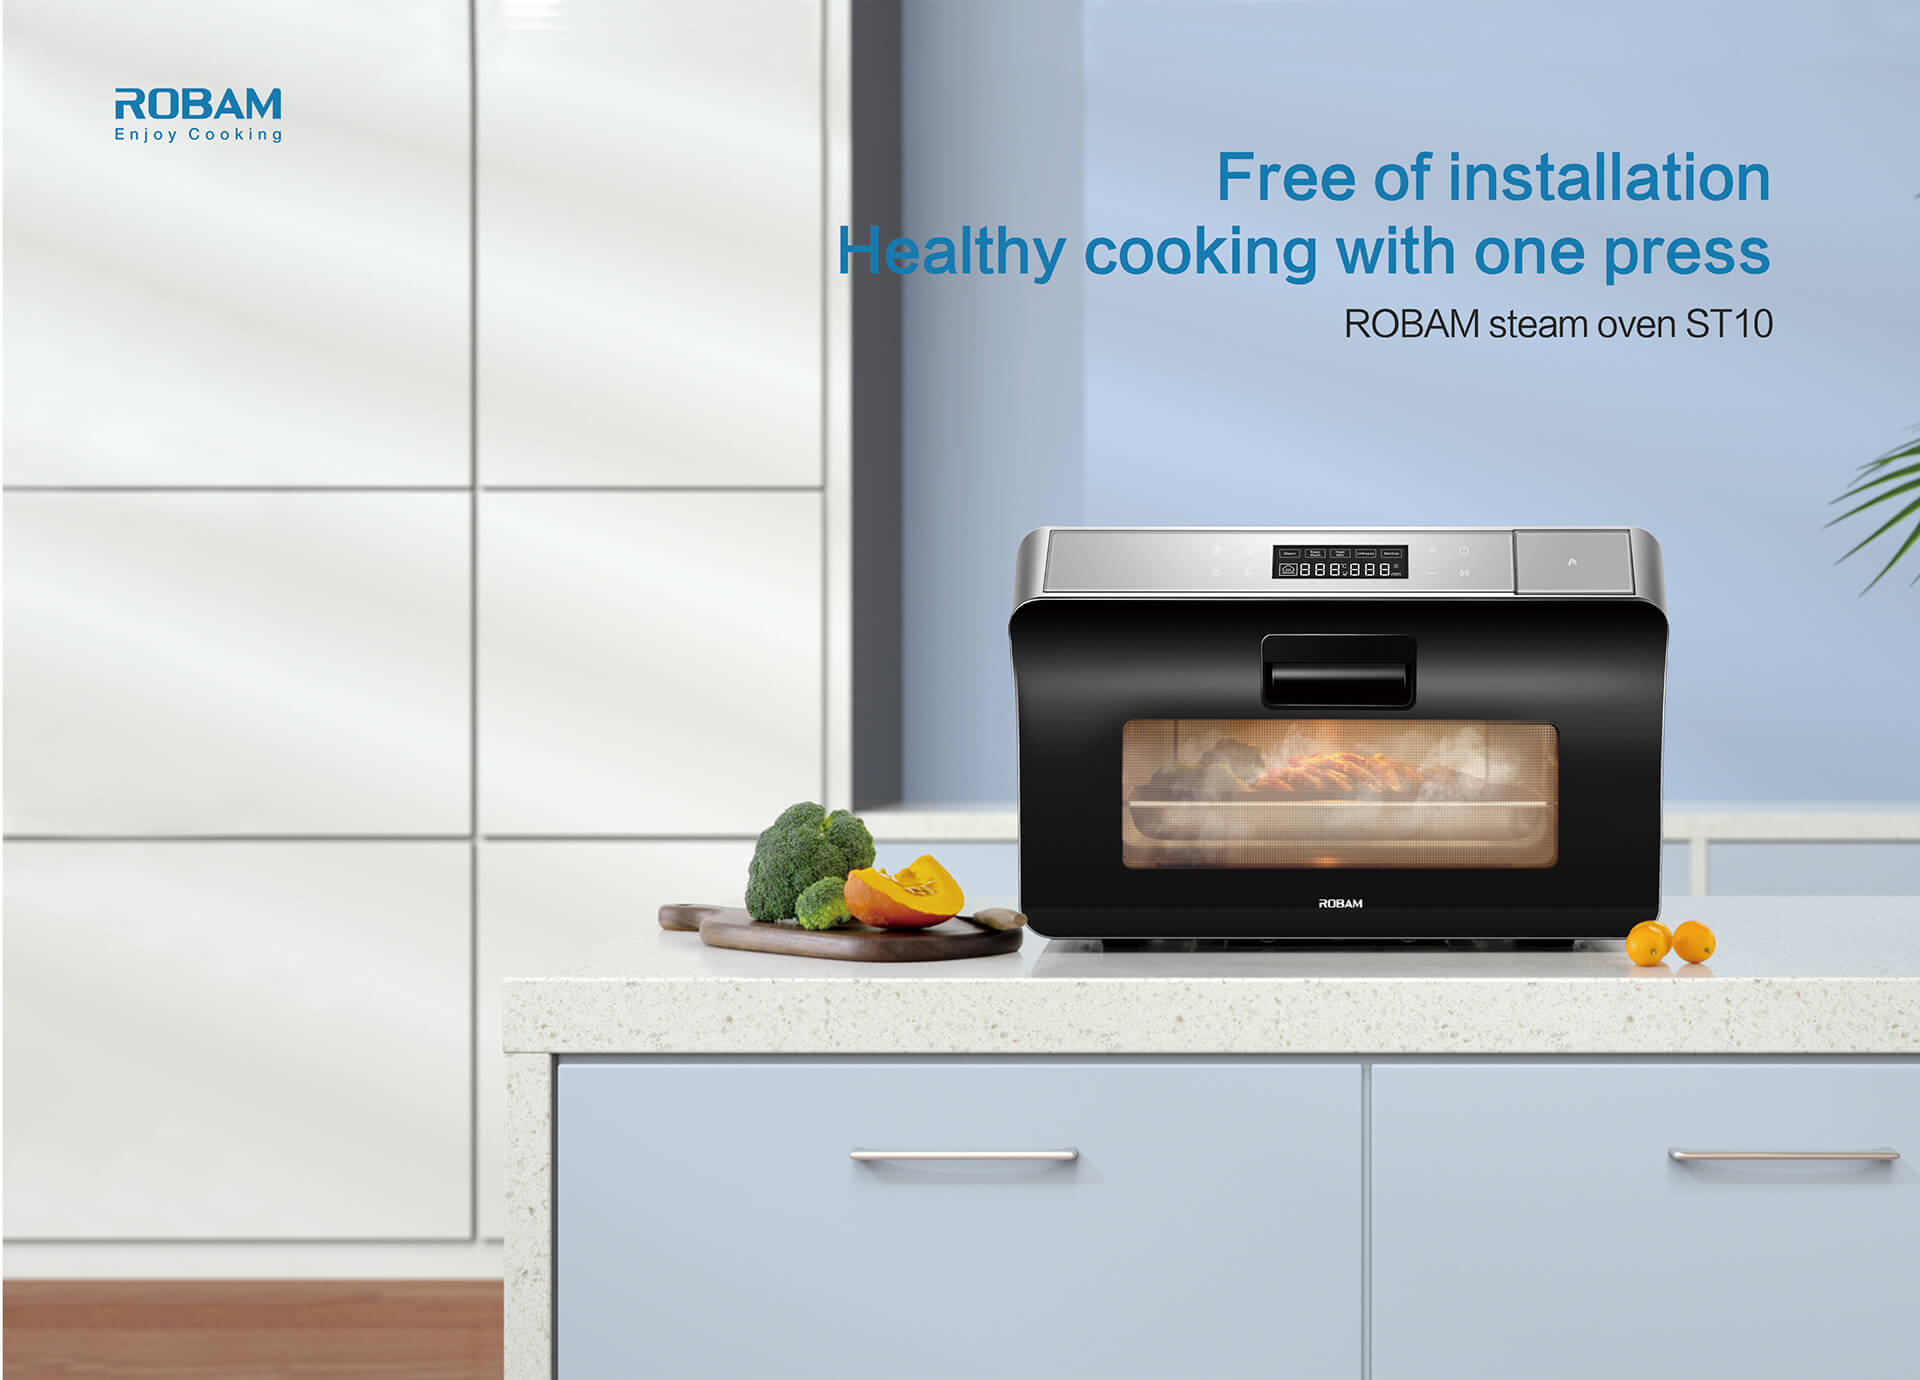 Free of Installation,space is not limited one button for healthy taste<br /><br /><br /><br /><br /> ROBAM steam oven  ST10